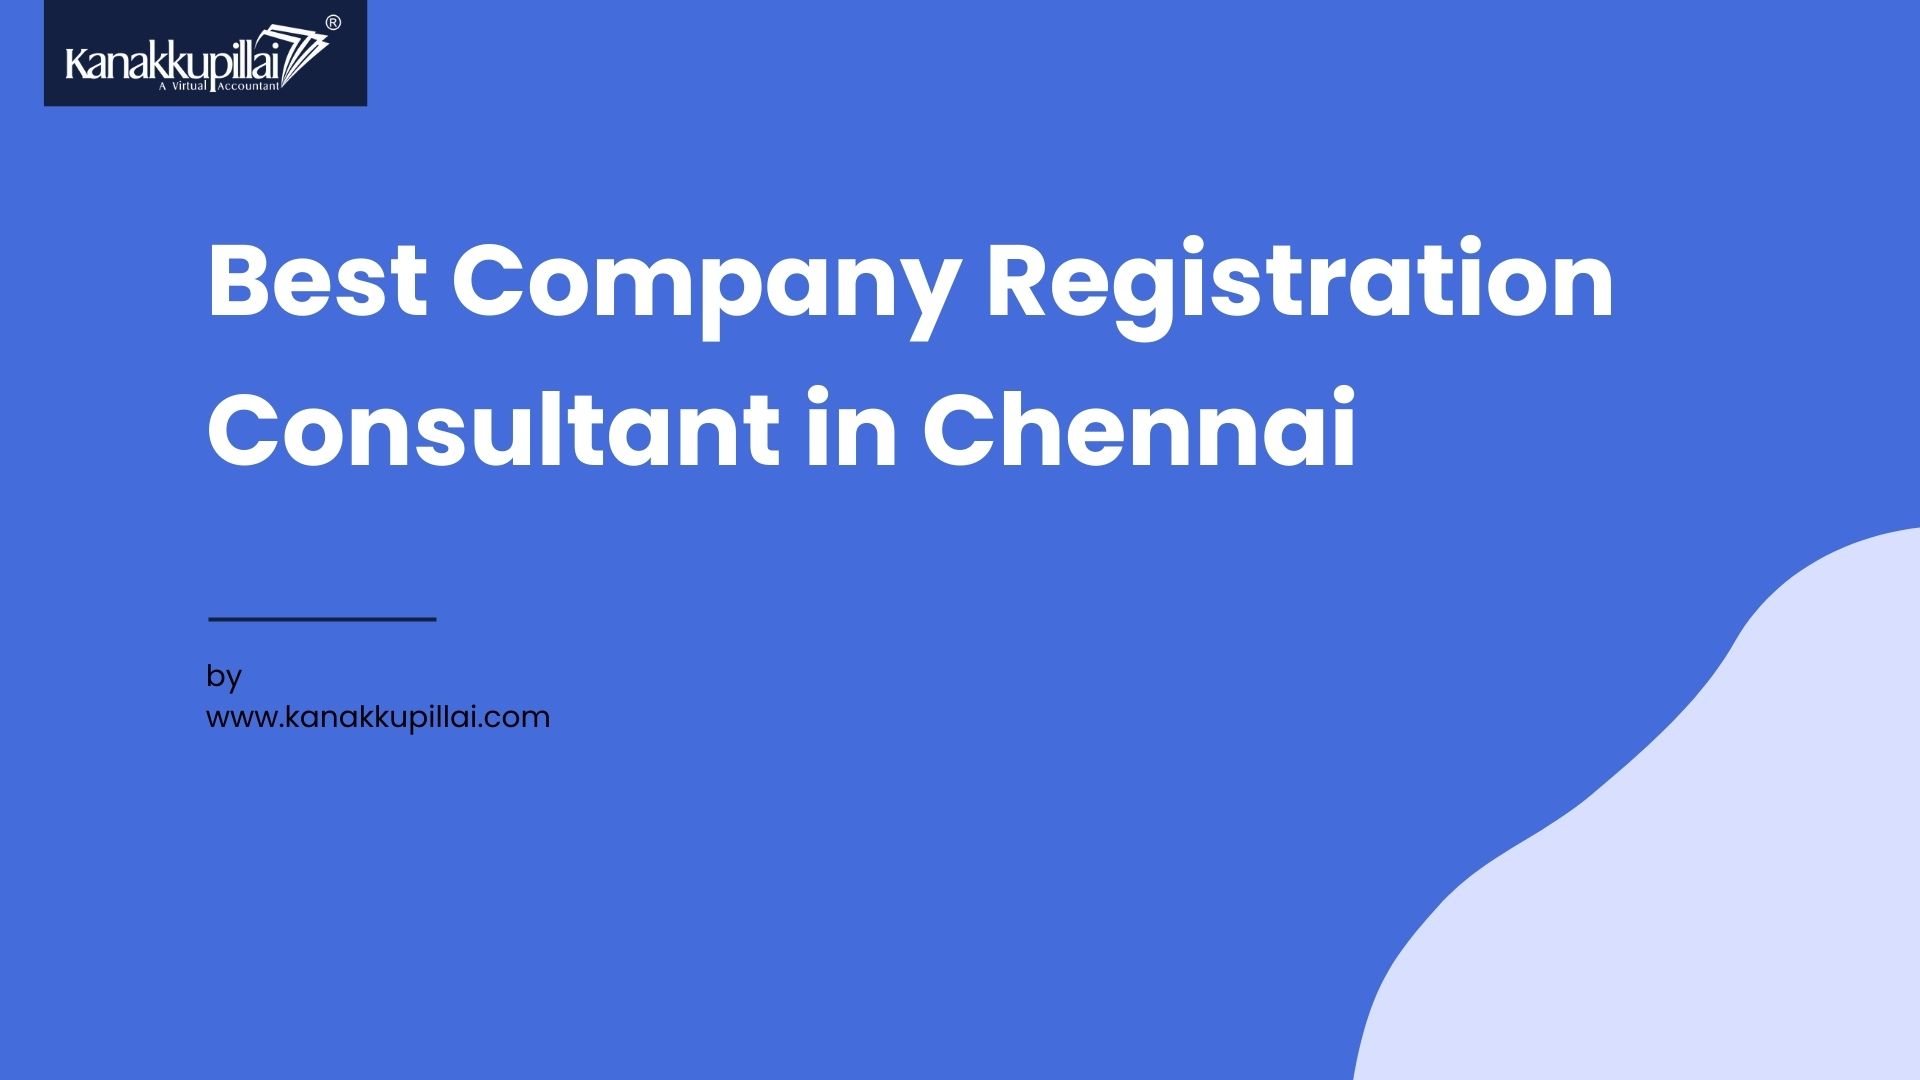 Tips to Find the Best Company Registration Consultant in Chennai